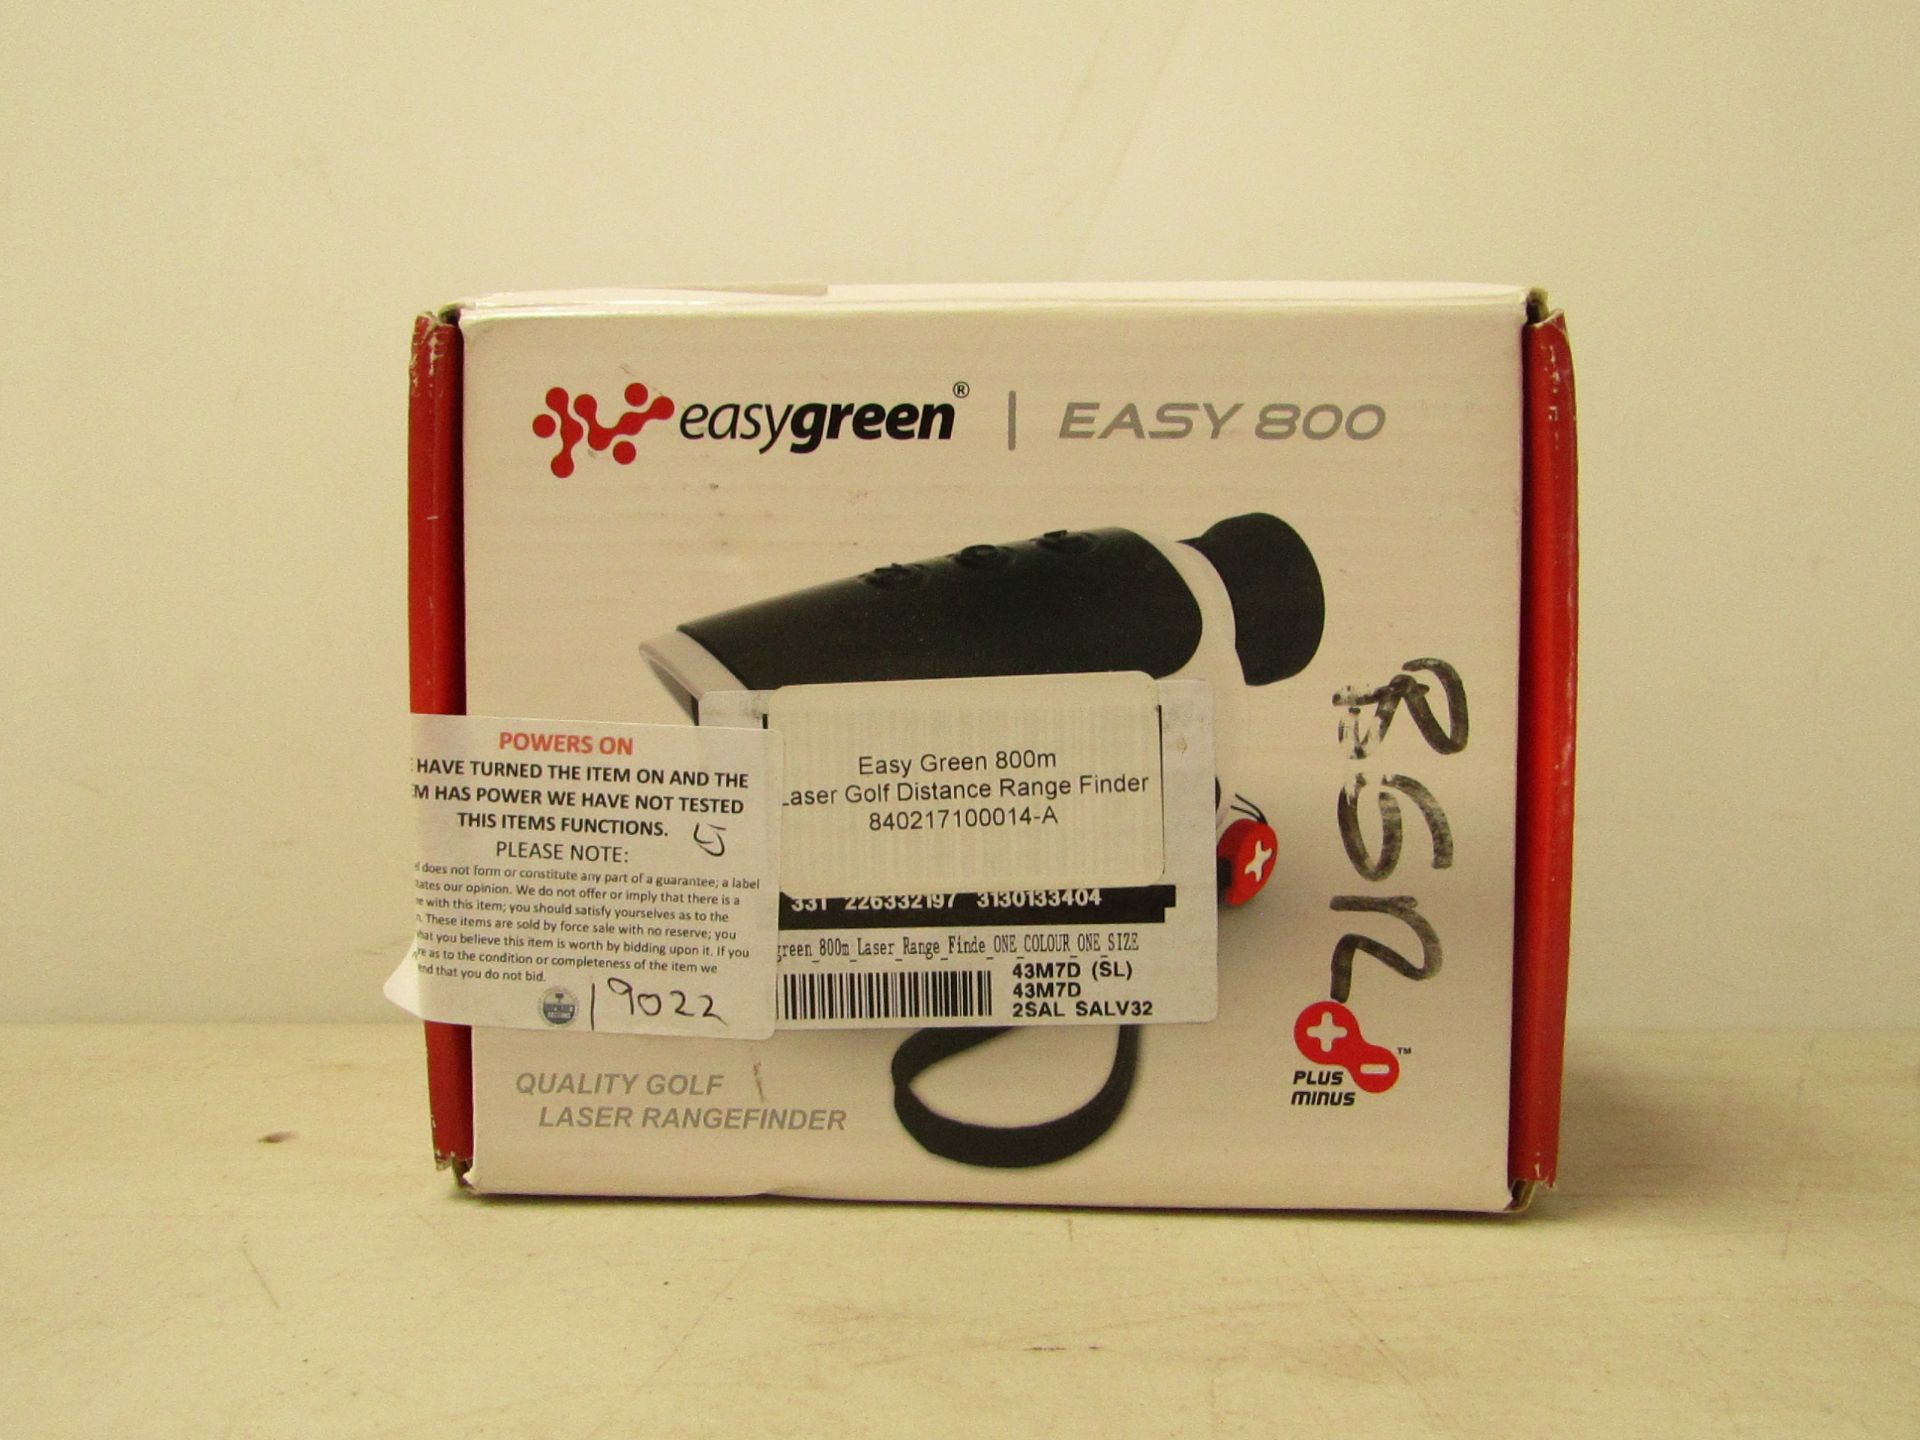 Easy green, easy 800 laser golf distance range finder, powers on and boxed.